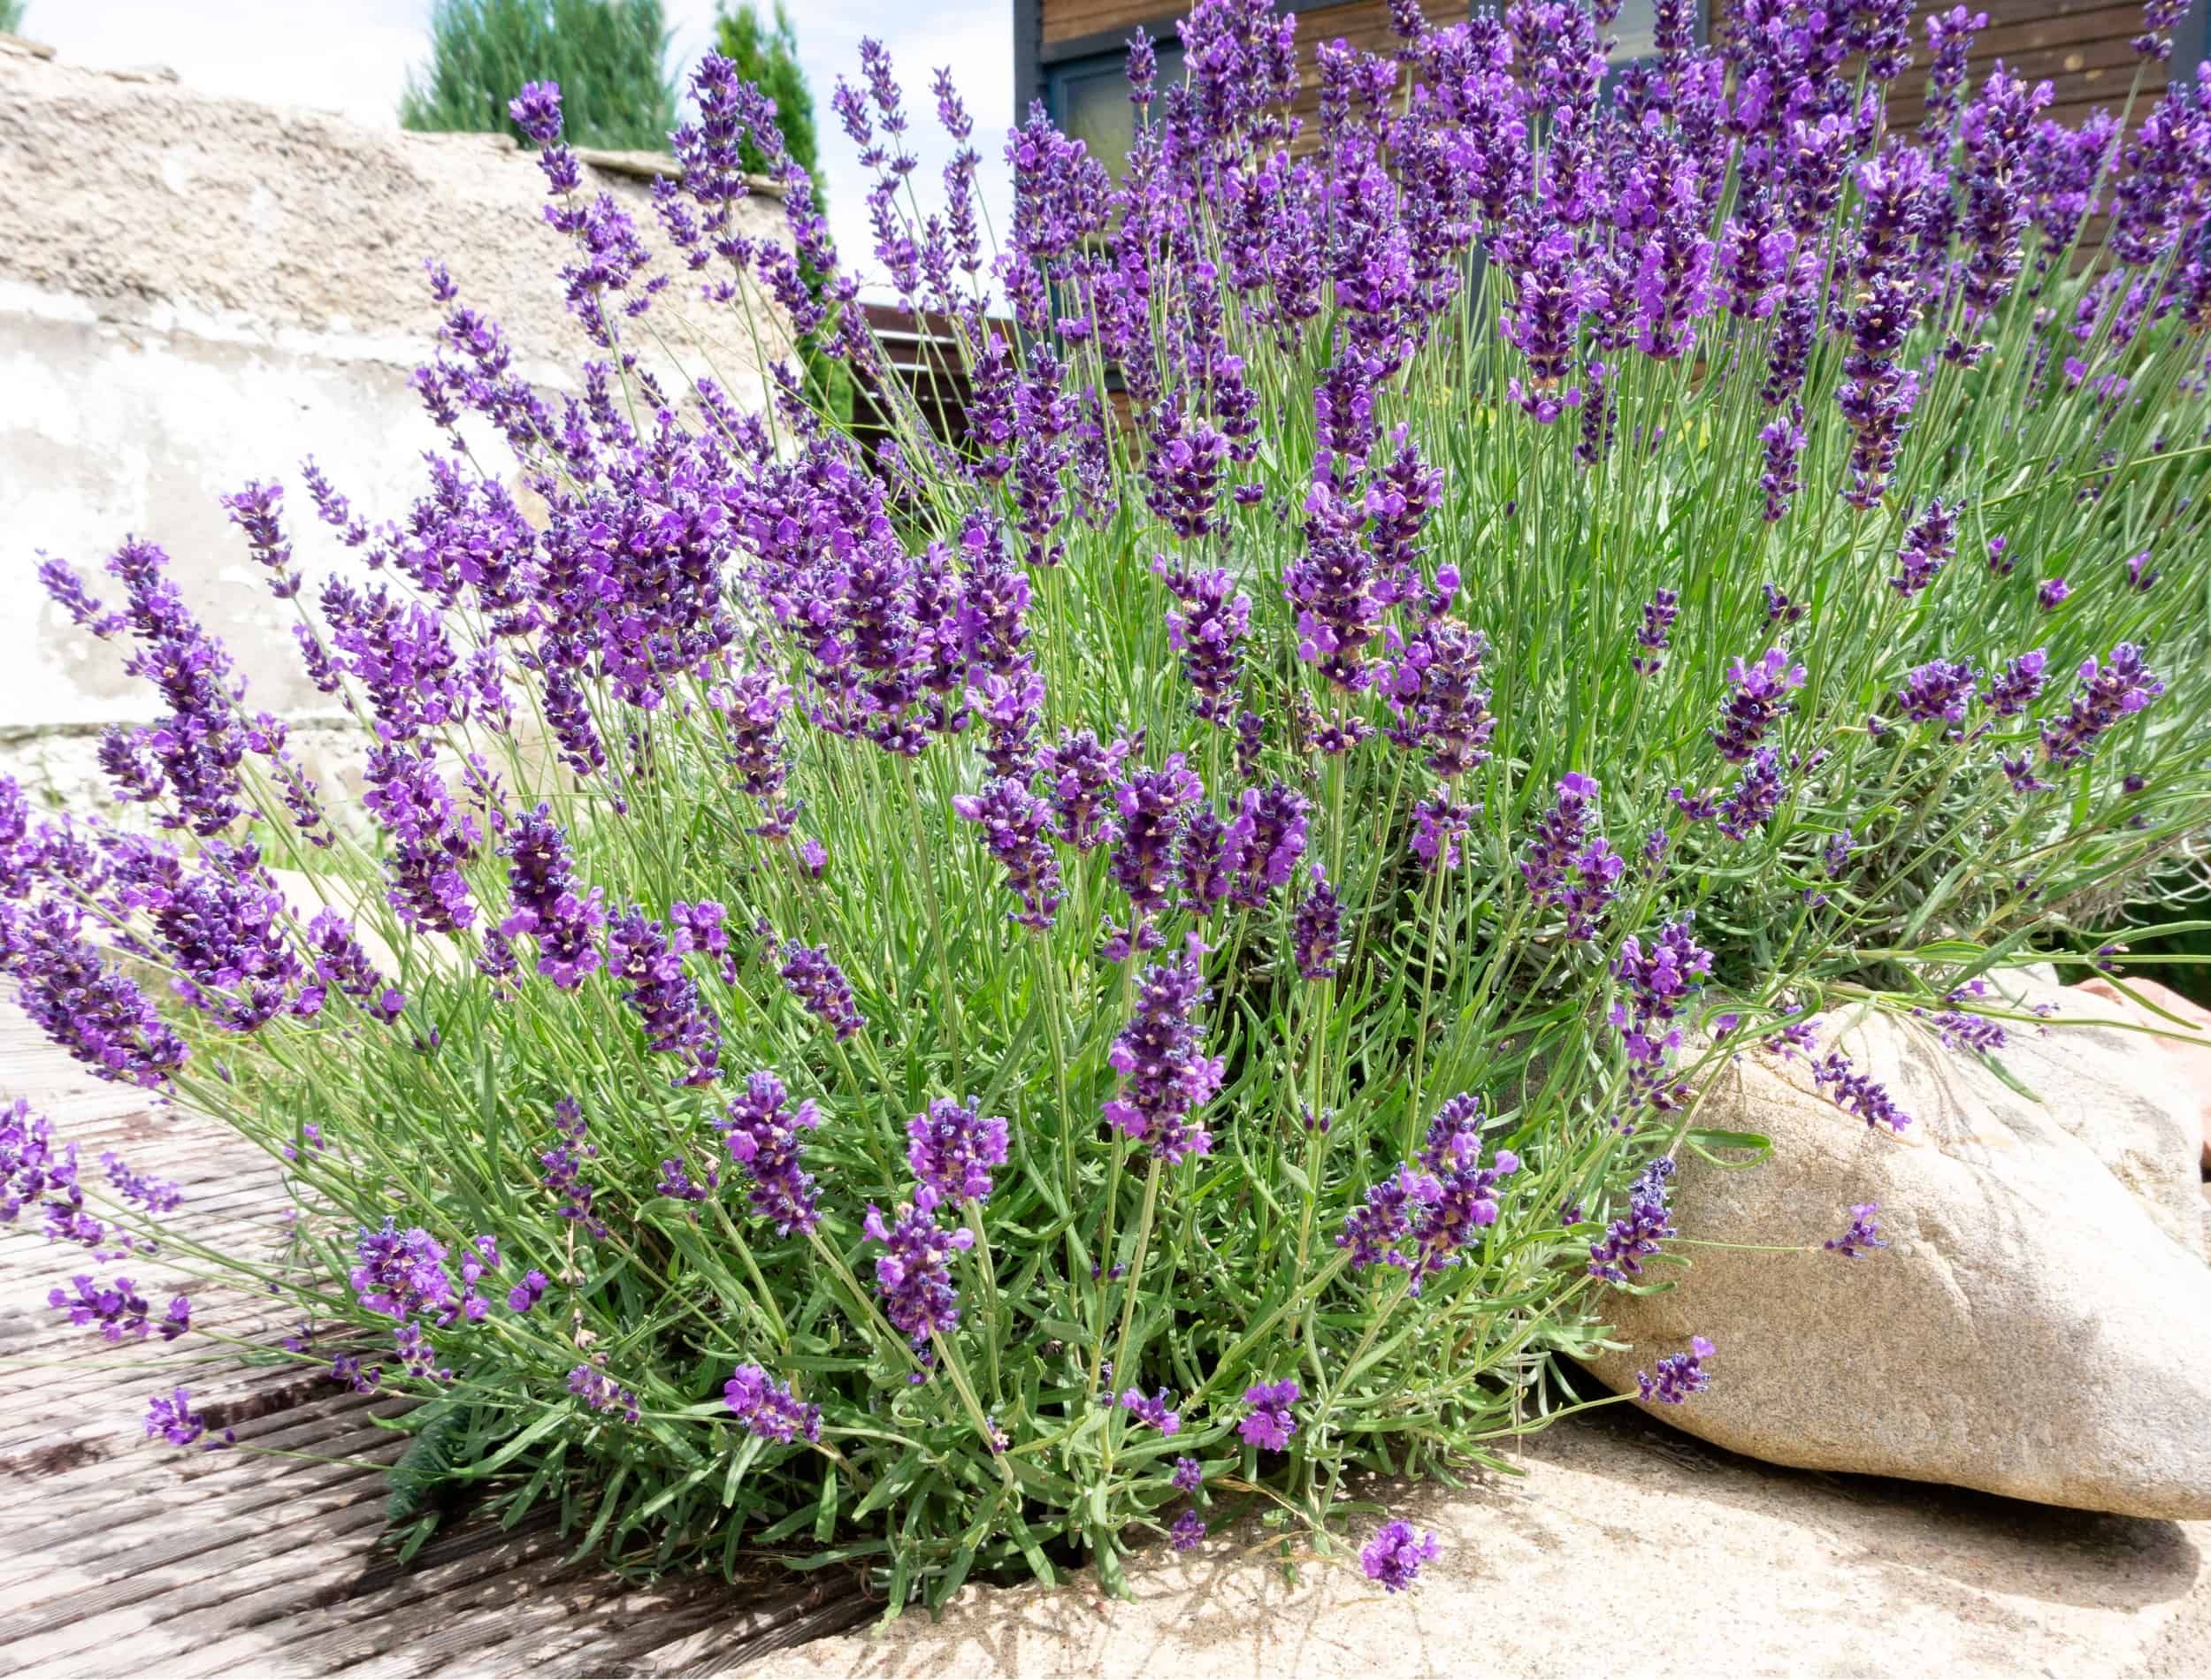 Bushes of lavender in landscape design. Lavender in the garden. The aromatic French Provence lavender grows surrounded by white stones and pebbles in the courtyard of the house.